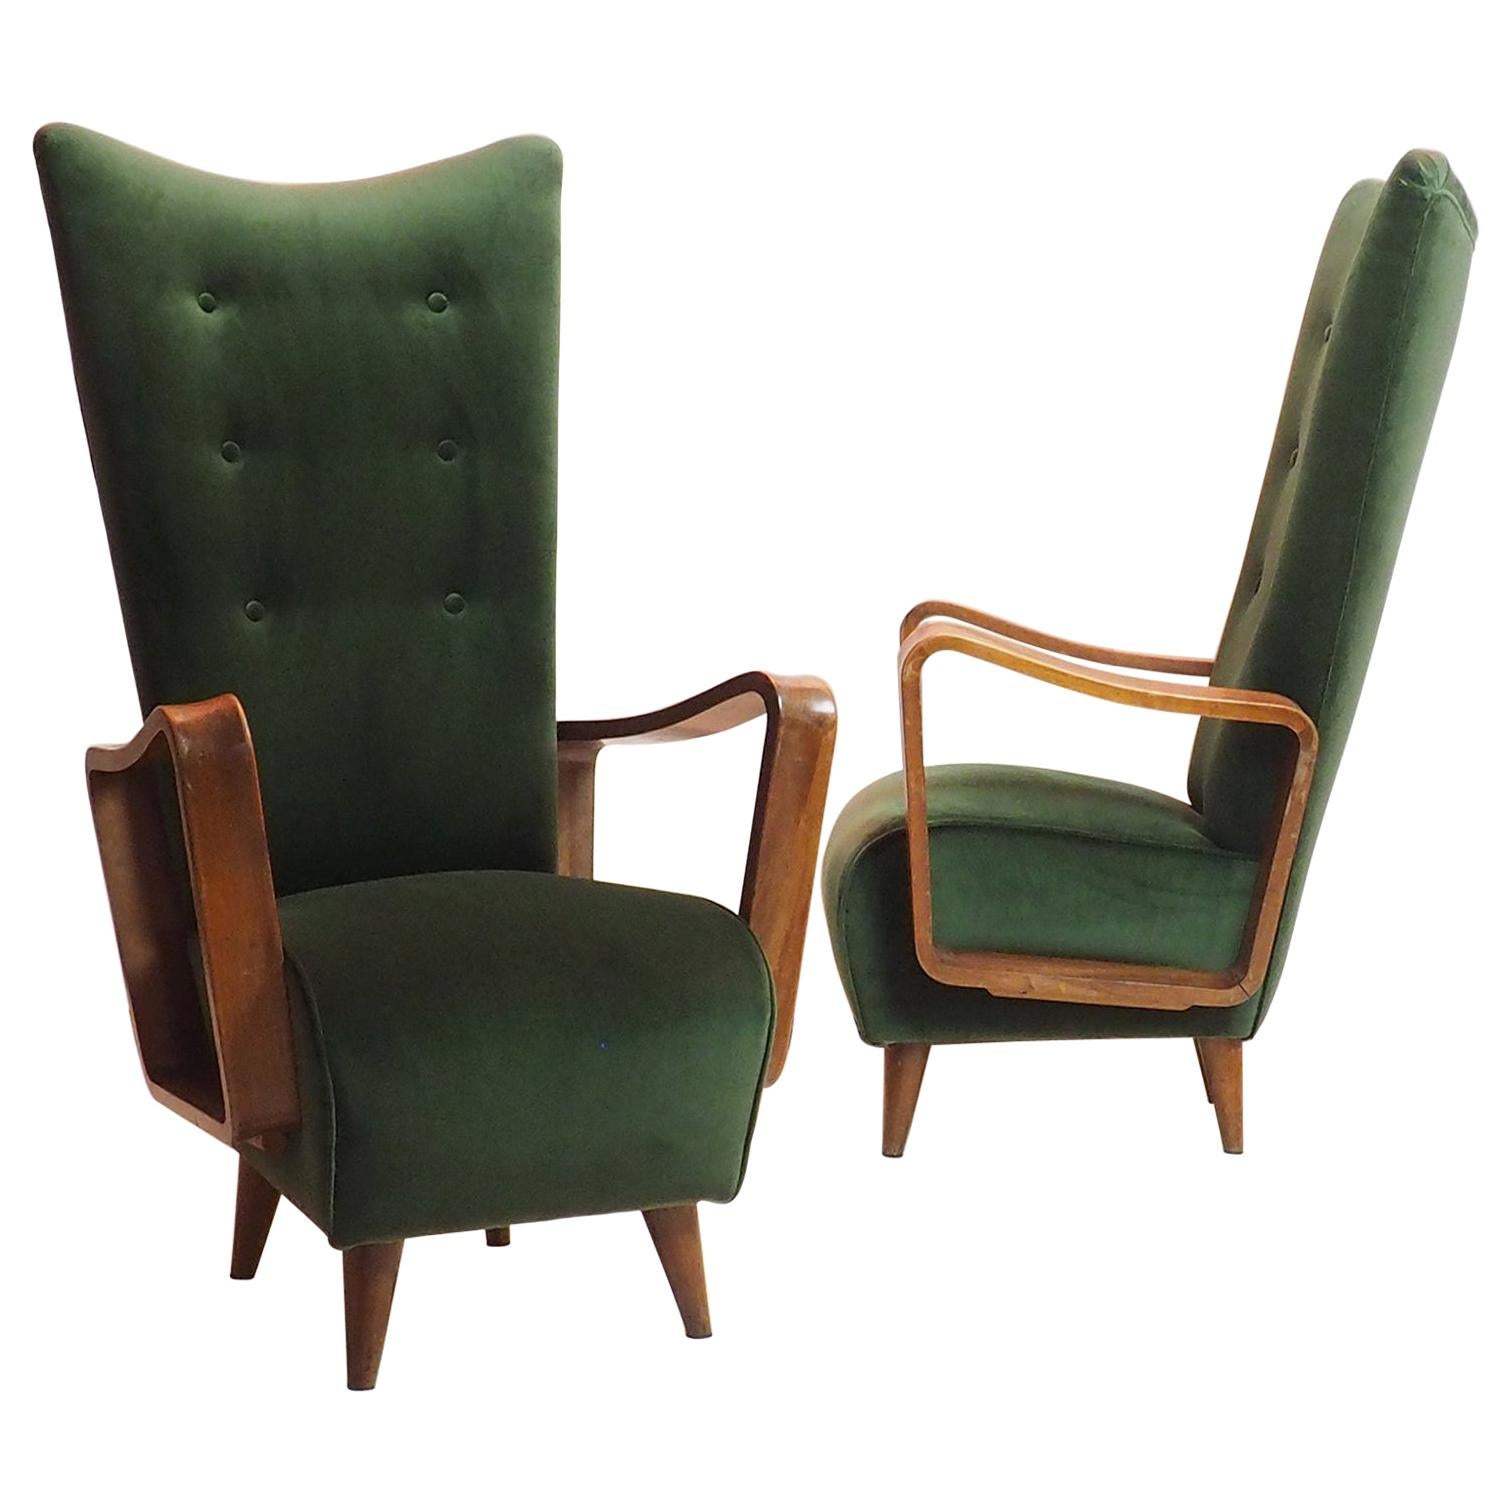 Midcentury High Back Italian Green Armchairs by Pietro Lingeri, Italy, 1950s For Sale